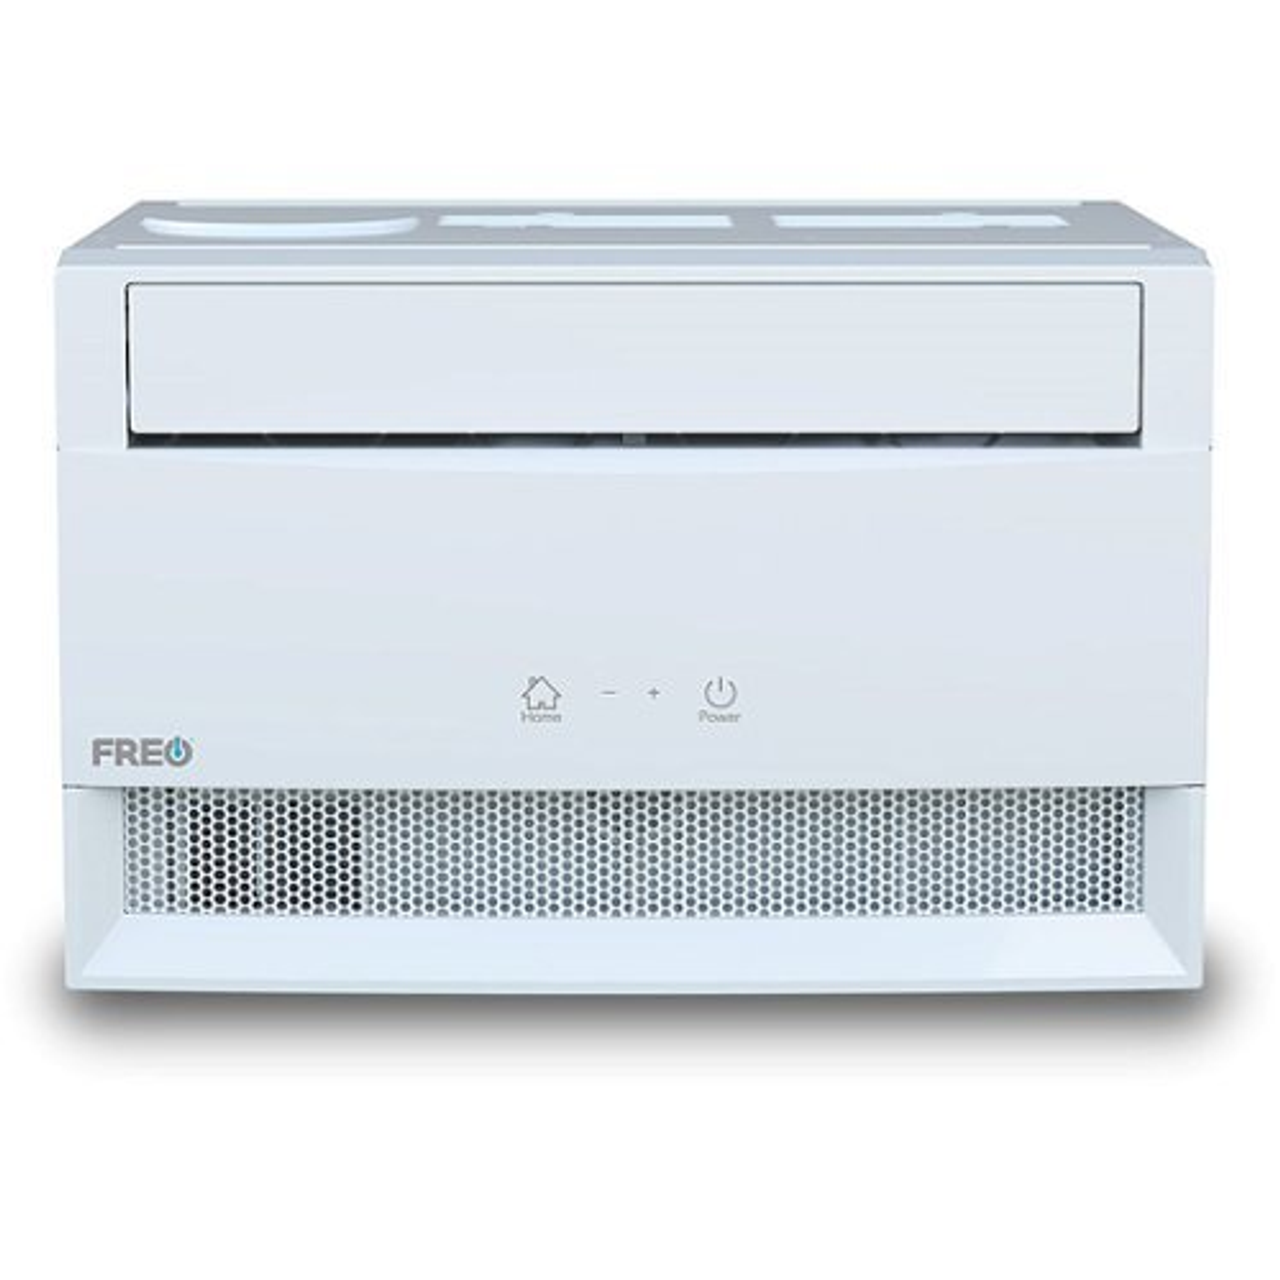 Freo - 6,000 BTU Window Air Conditioner | Energy Star | Follow Me Remote | Dehumidifier | AC for Rooms up to 250 Sq. Ft - White